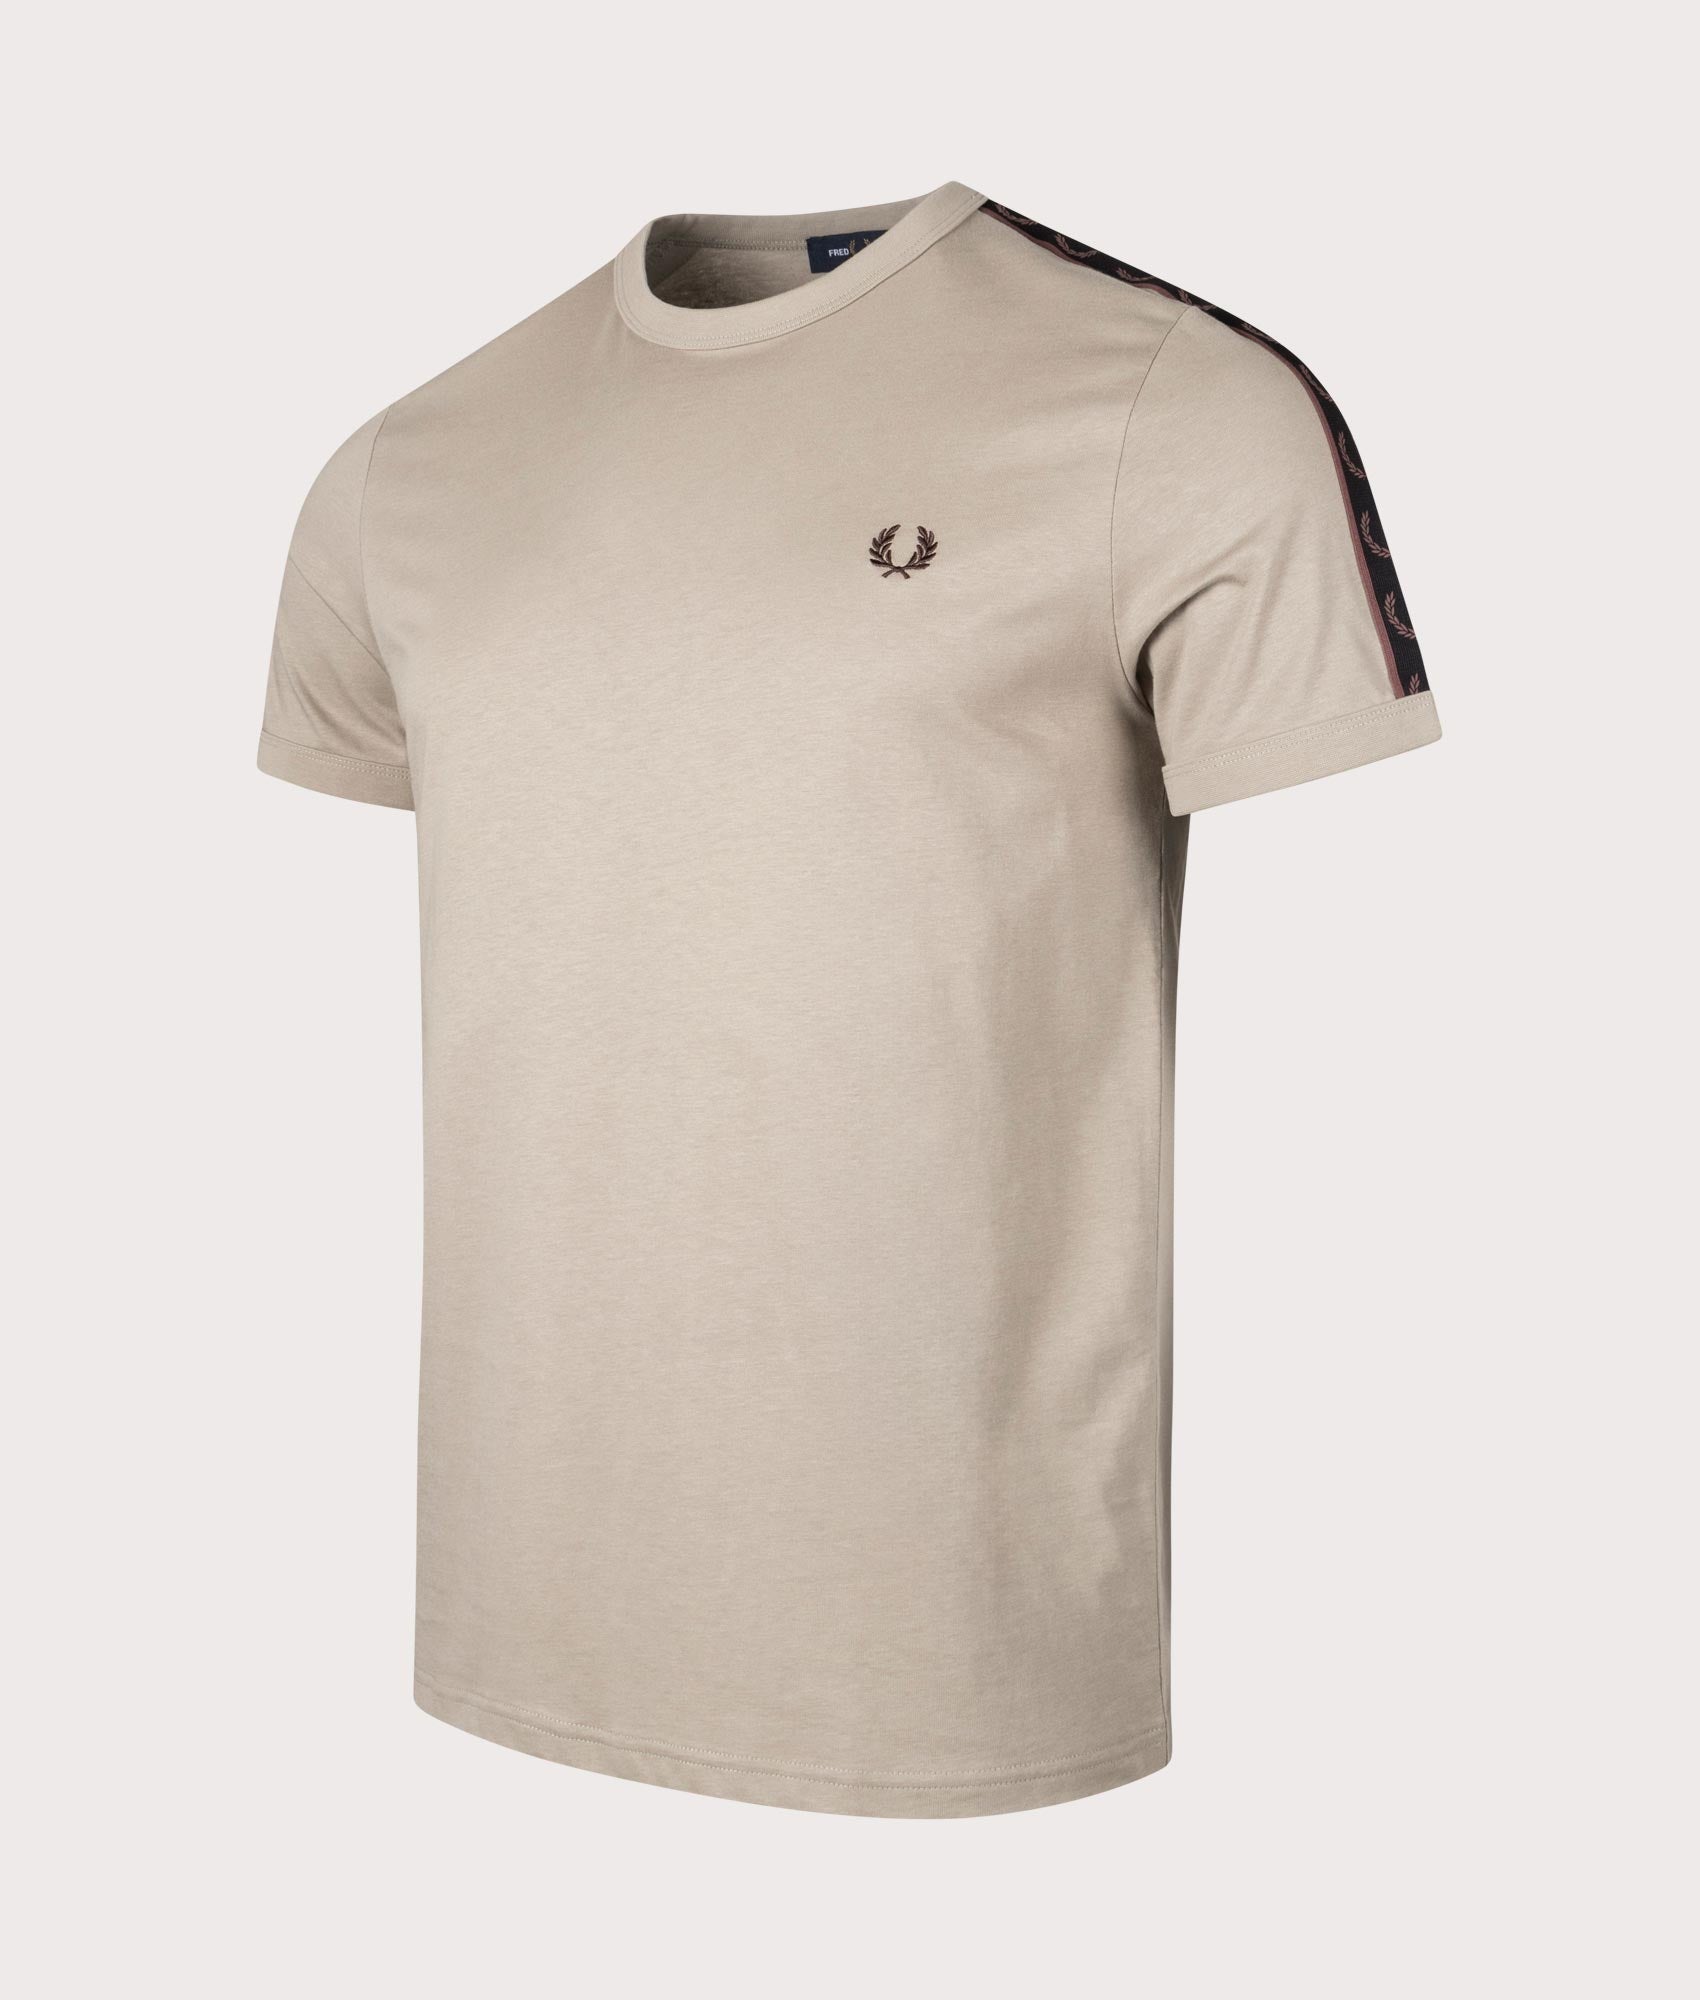 Fred Perry Mens Contrast Tape Ringer T-Shirt - Colour: U84 Warm Grey/Brick - Size: XXL